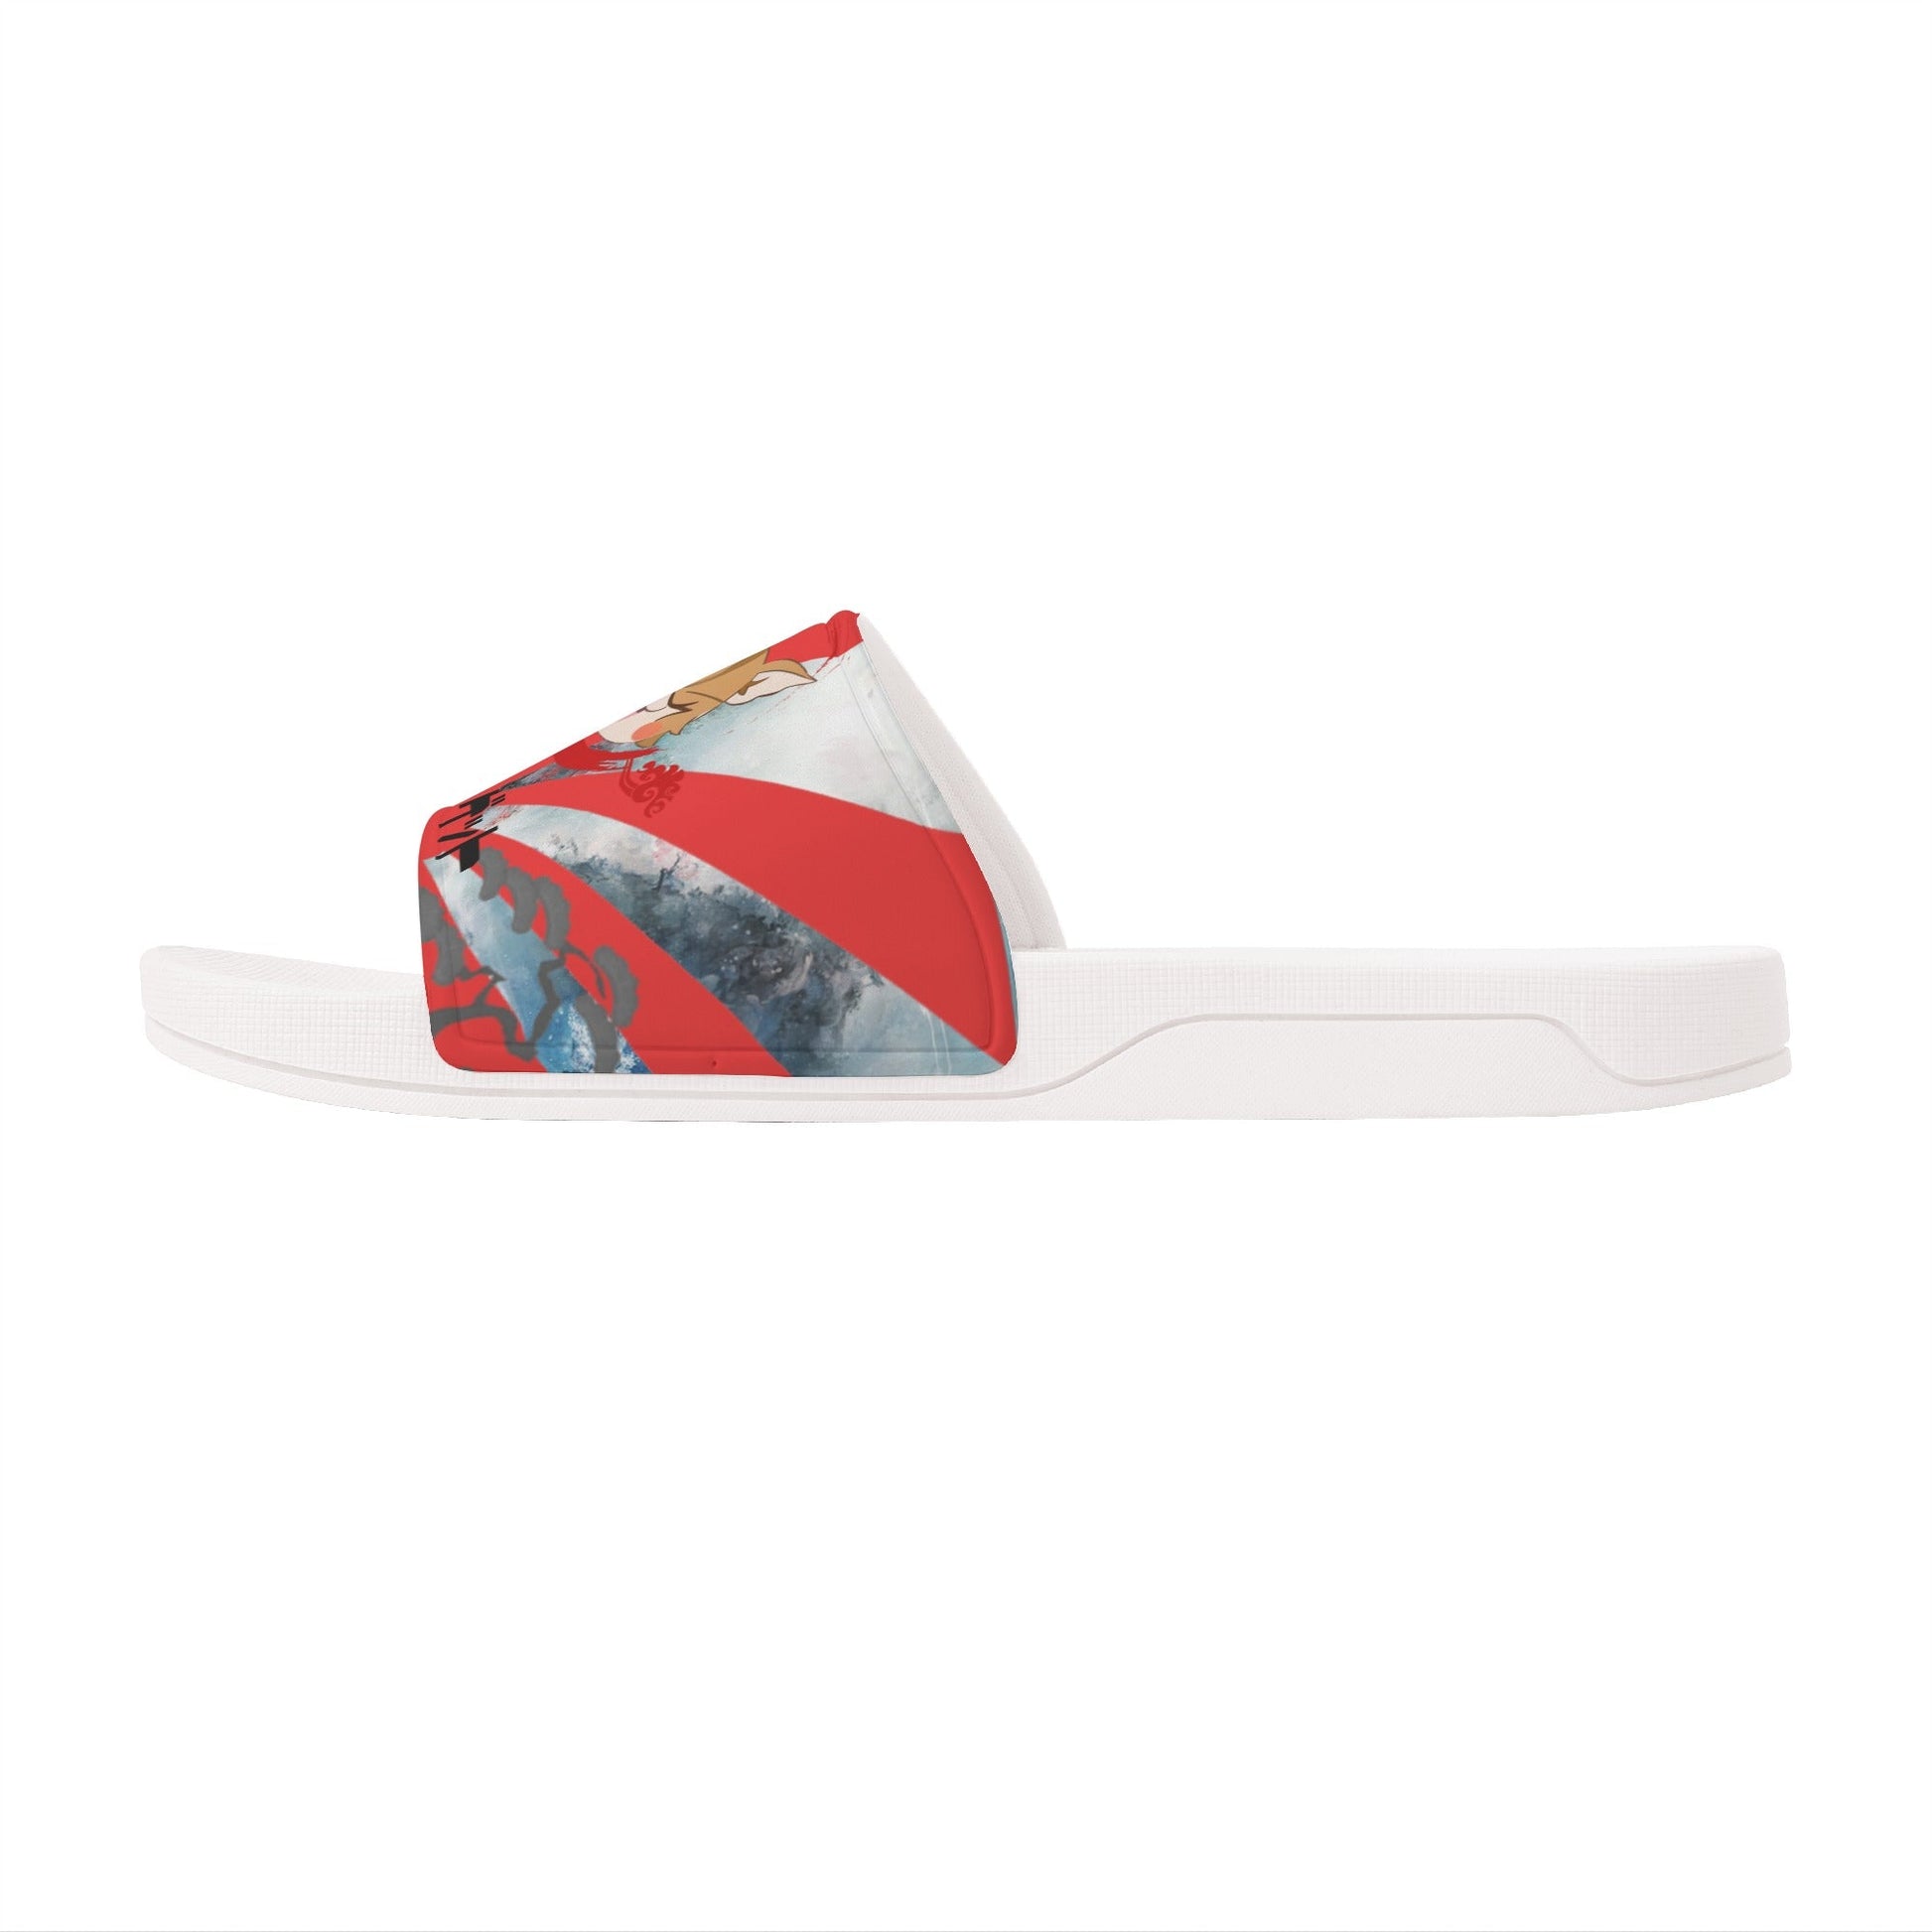 Stand out  with the  Tokyo Nugget Womens Slide Sandals Shoes  available at Hey Nugget. Grab yours today!